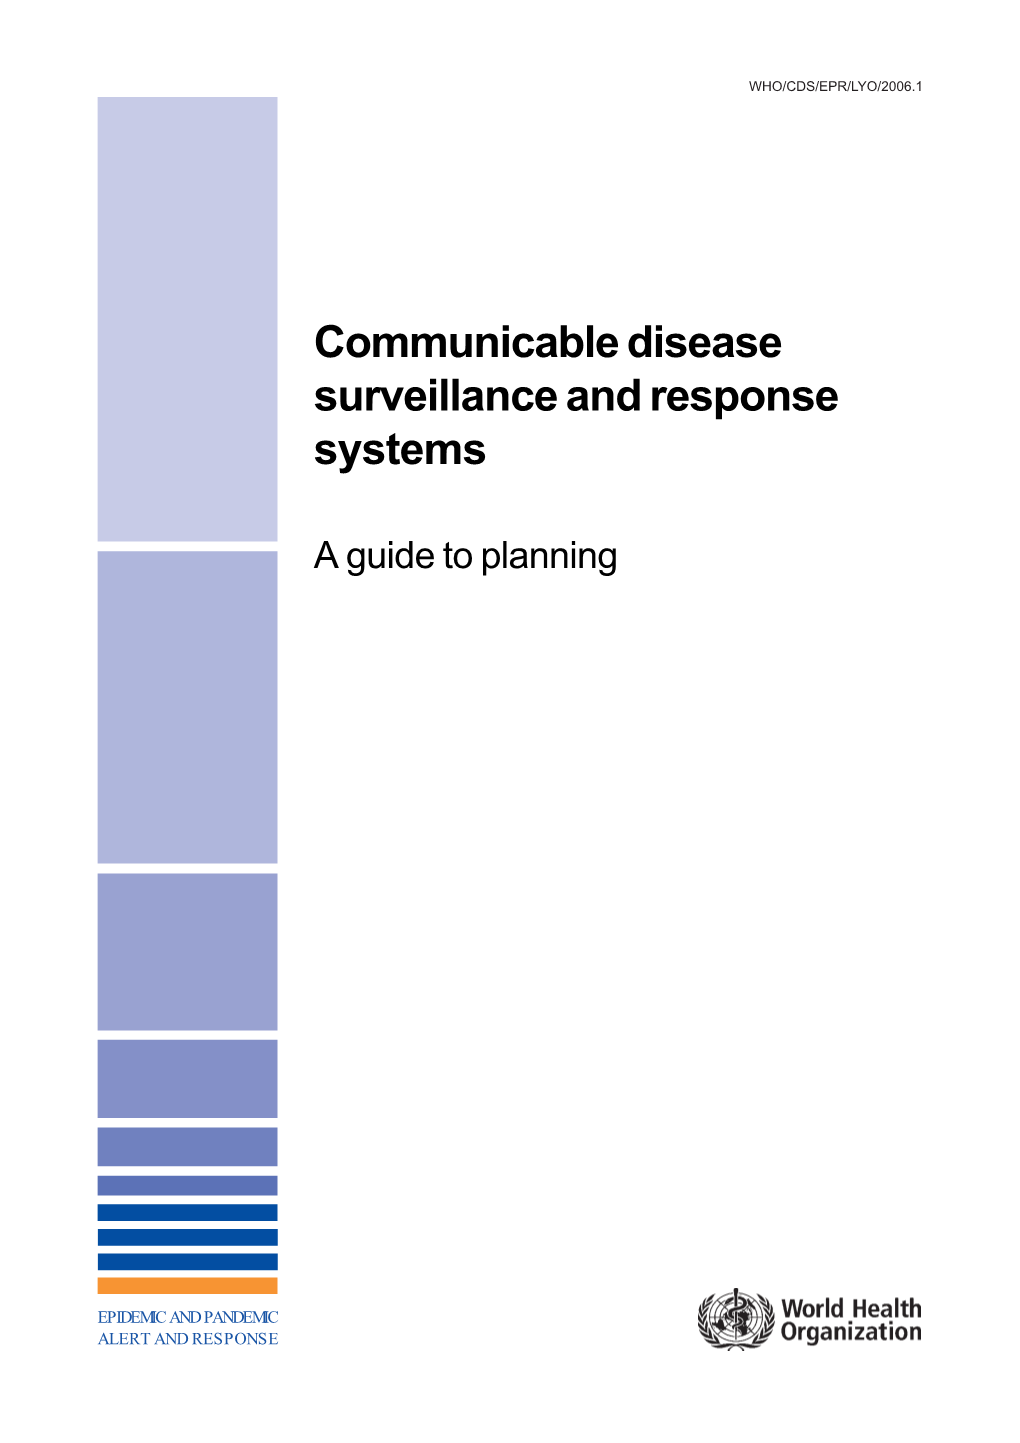 Communicable Disease Surveillance and Response Systems